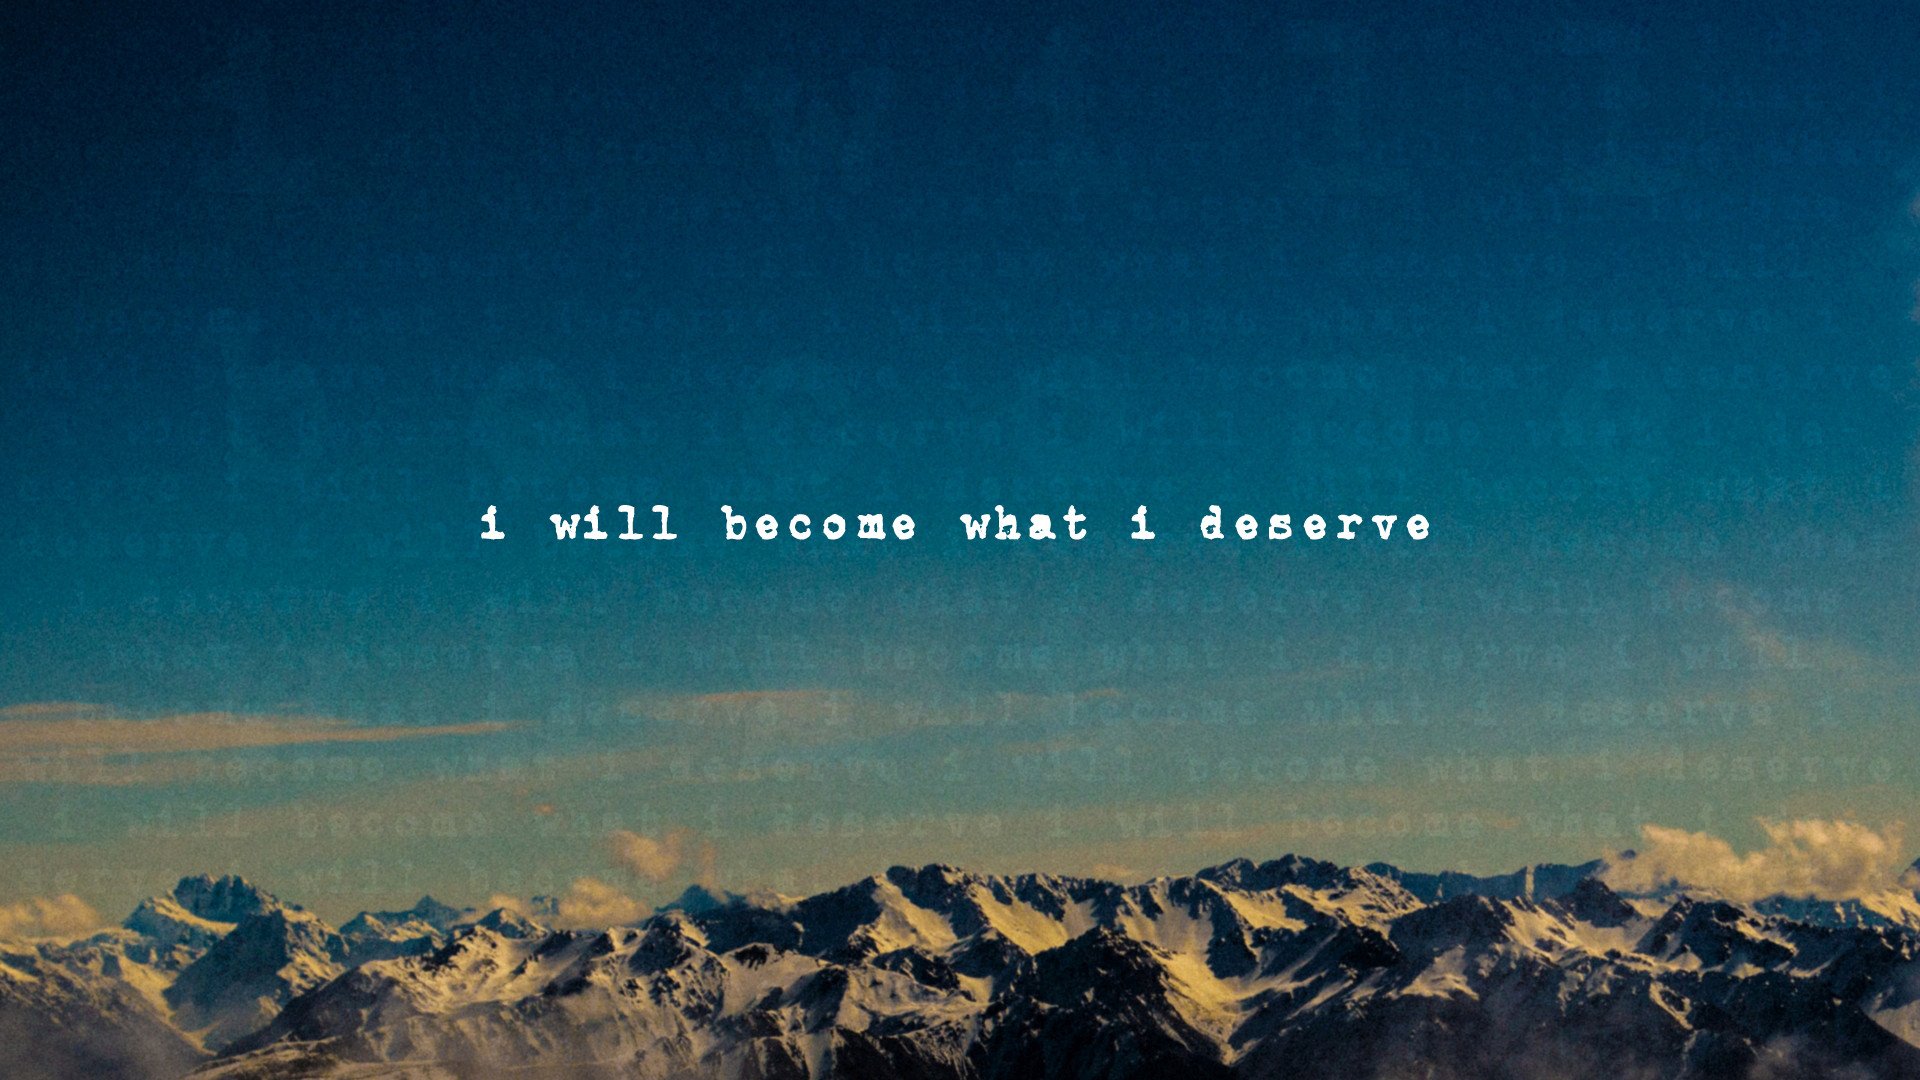 Will Become What I Deserve - HD Wallpaper 